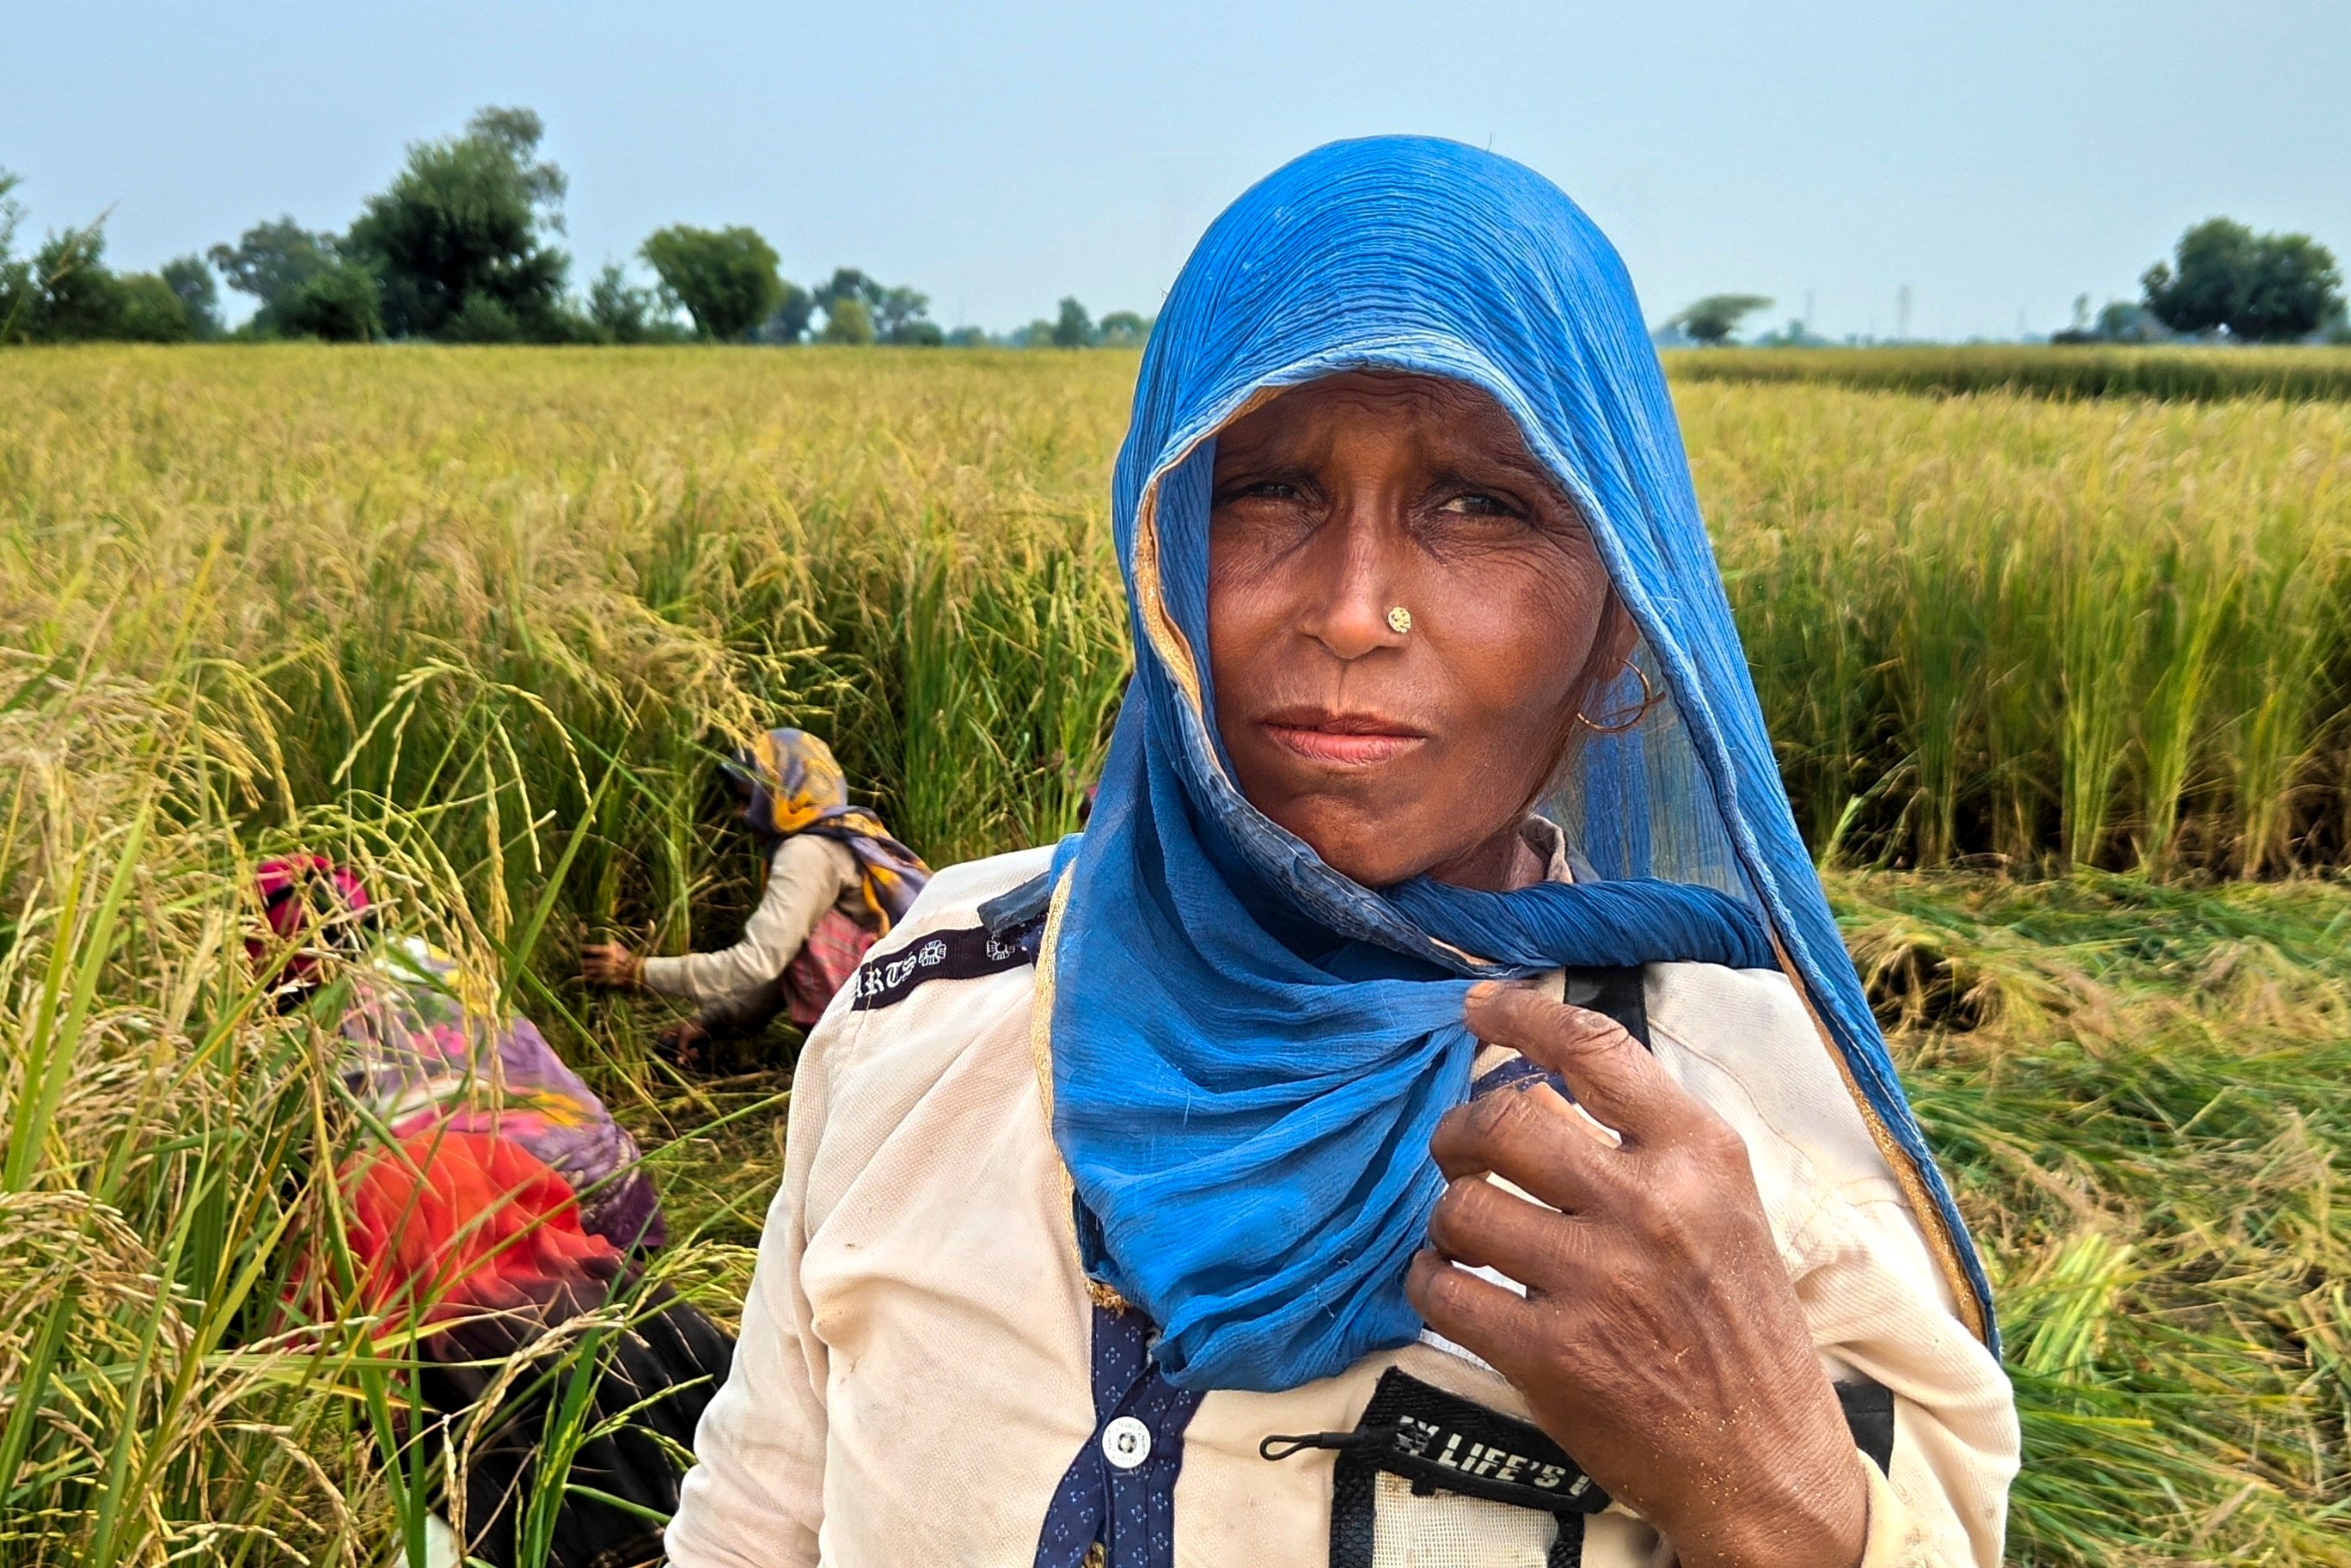 Savita Singh, a farm worker, looks on as other farm workers harvest wheat in Nanu village of Aligarh district in Uttar Pradesh state, India, on Oct. 17, 2023.  Singh lost a finger to amputation in 2022 due to a chemical infection. She blames climate change that required her to apply much more pesticide and fertilizer to make up for declining yields. (Uzmi Athar/Press Trust of India via AP)